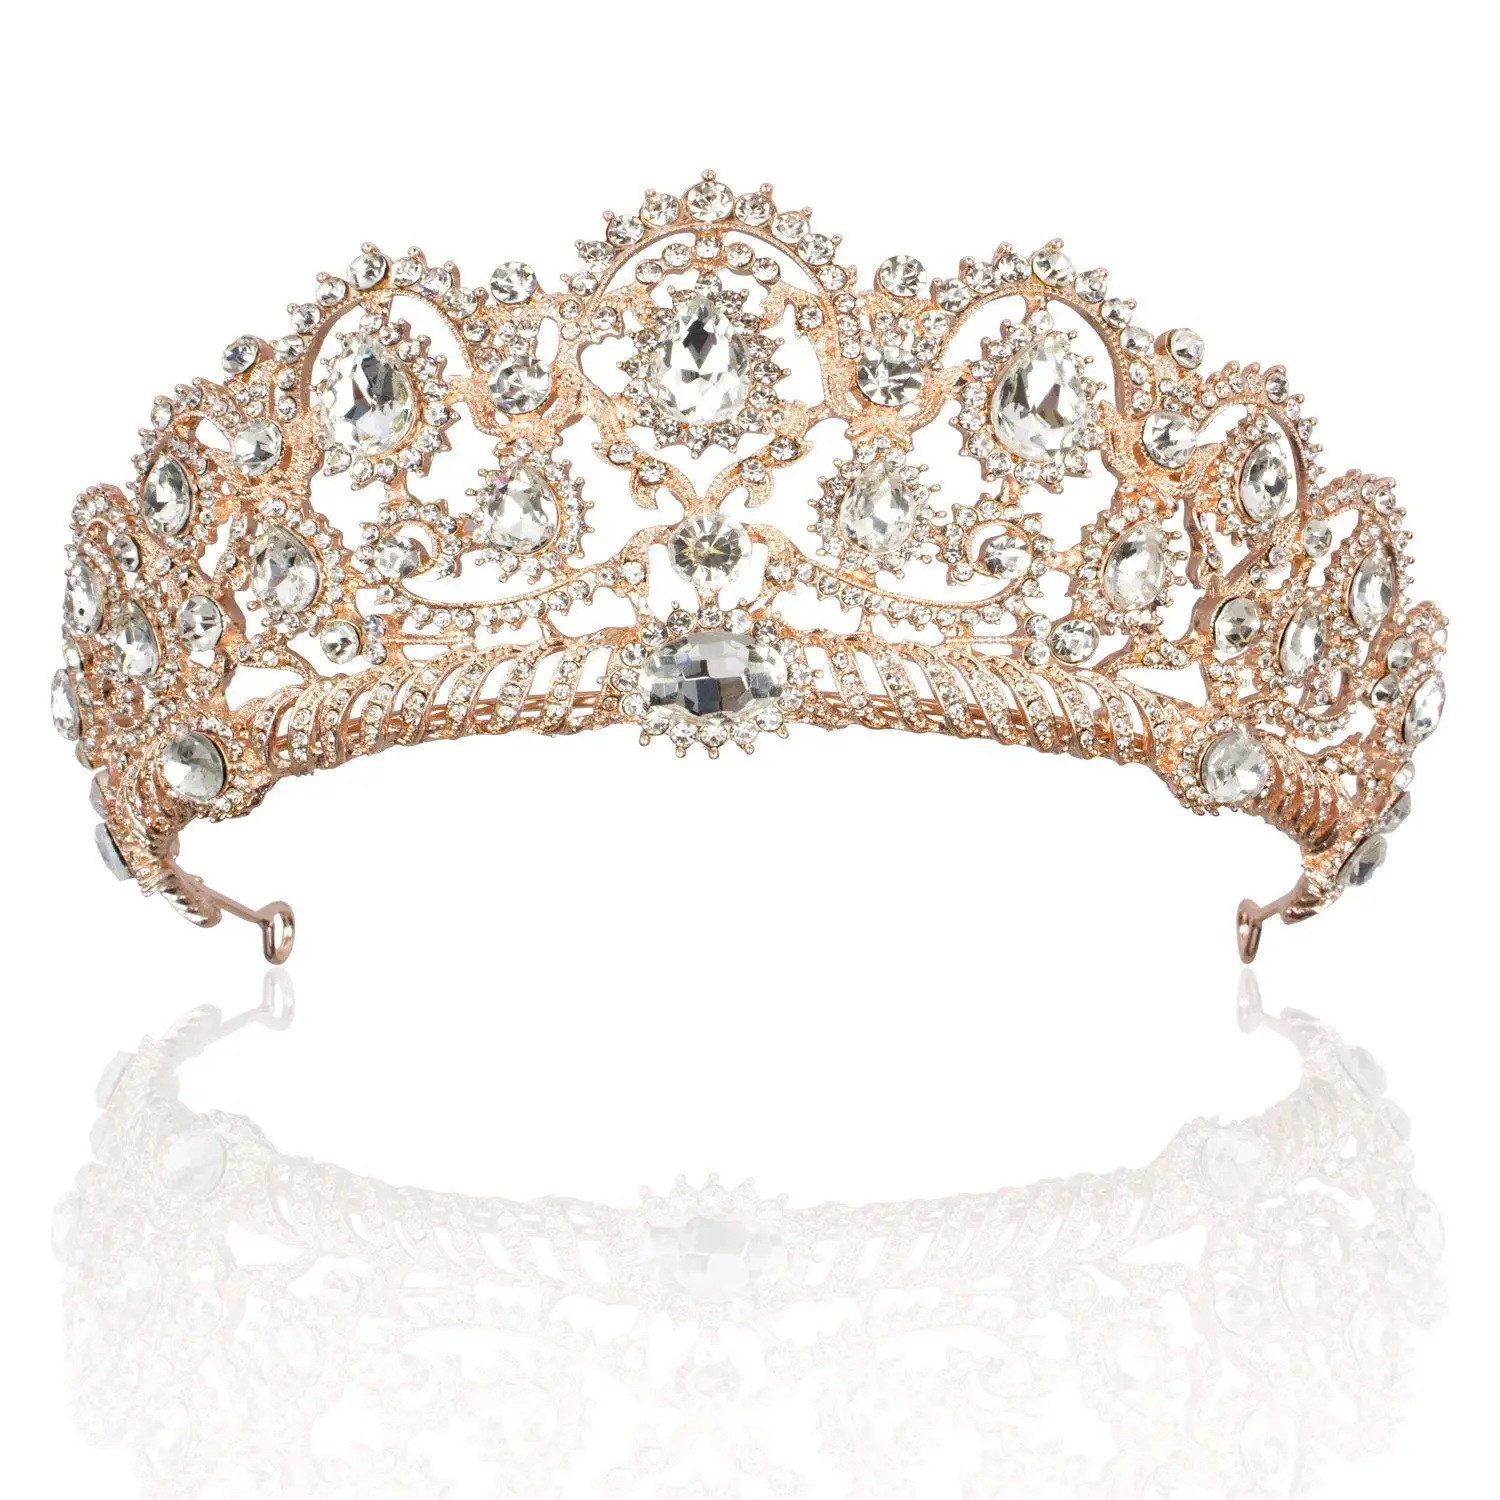 Cheap Gold Crowns And Tiaras, find Gold Crowns And Tiaras deals on line ...